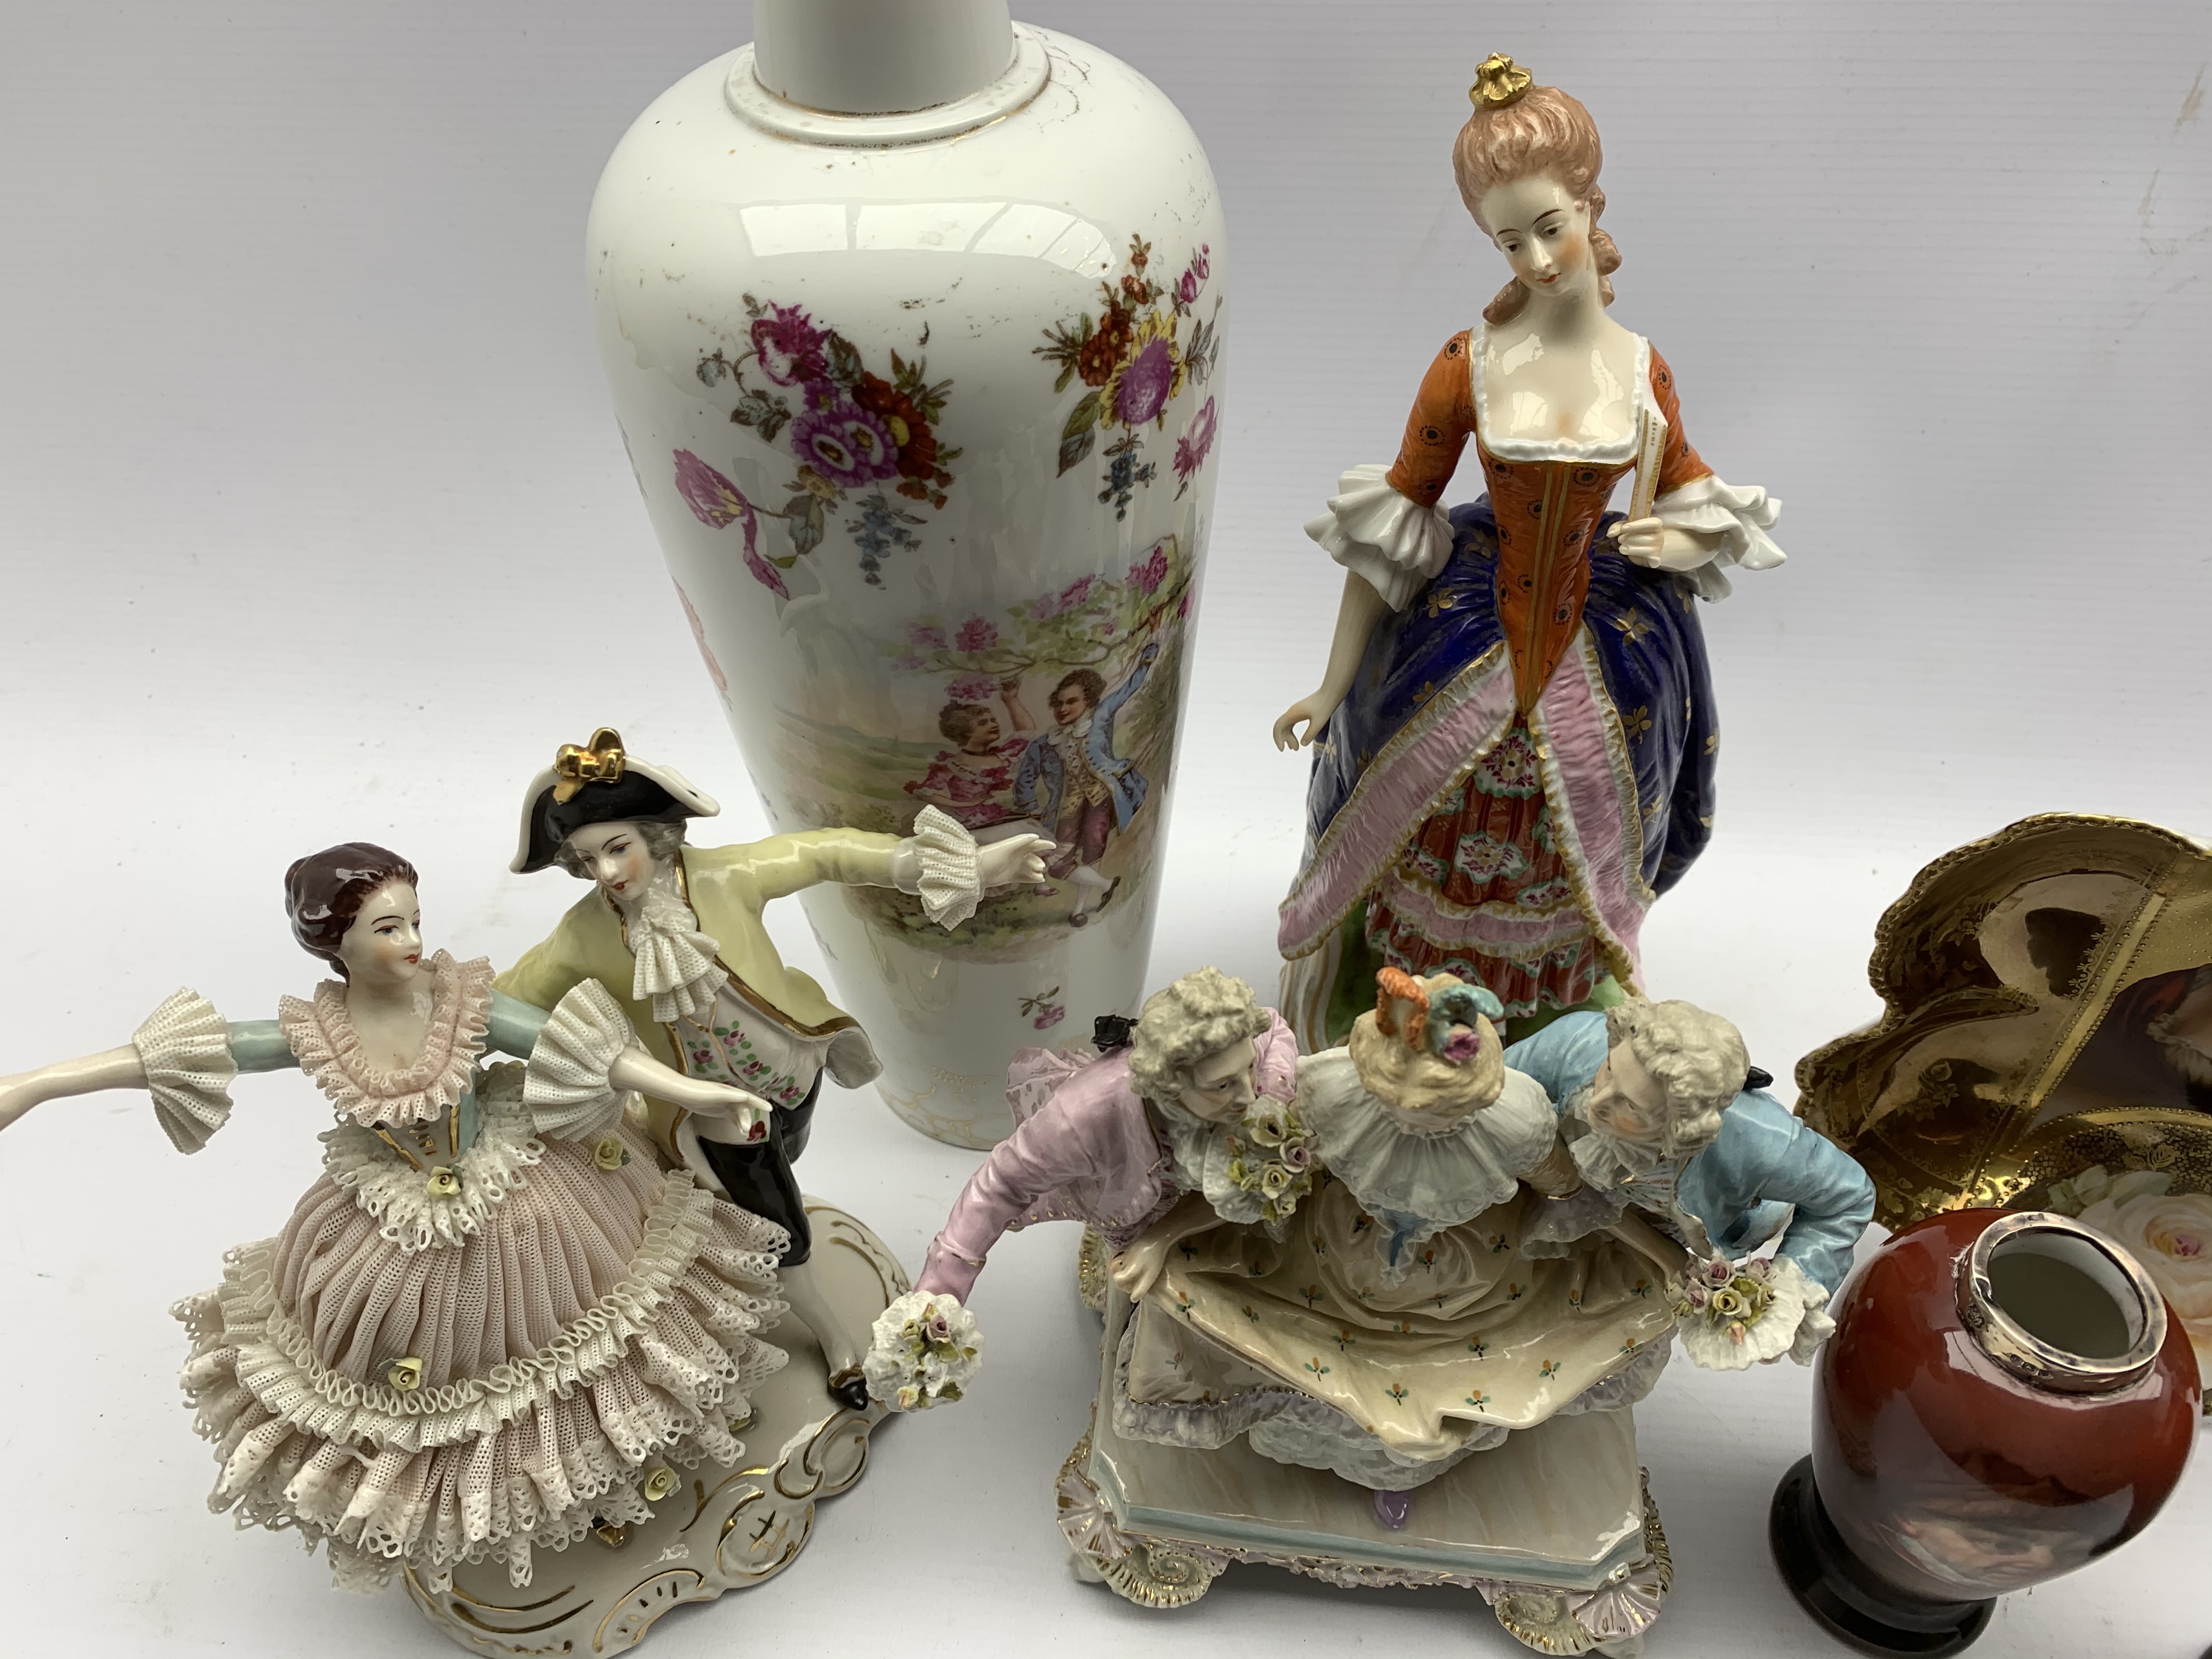 German porcelain group of three courtly figures H20cm, modern Dresden figure group, pair of small va - Image 6 of 6